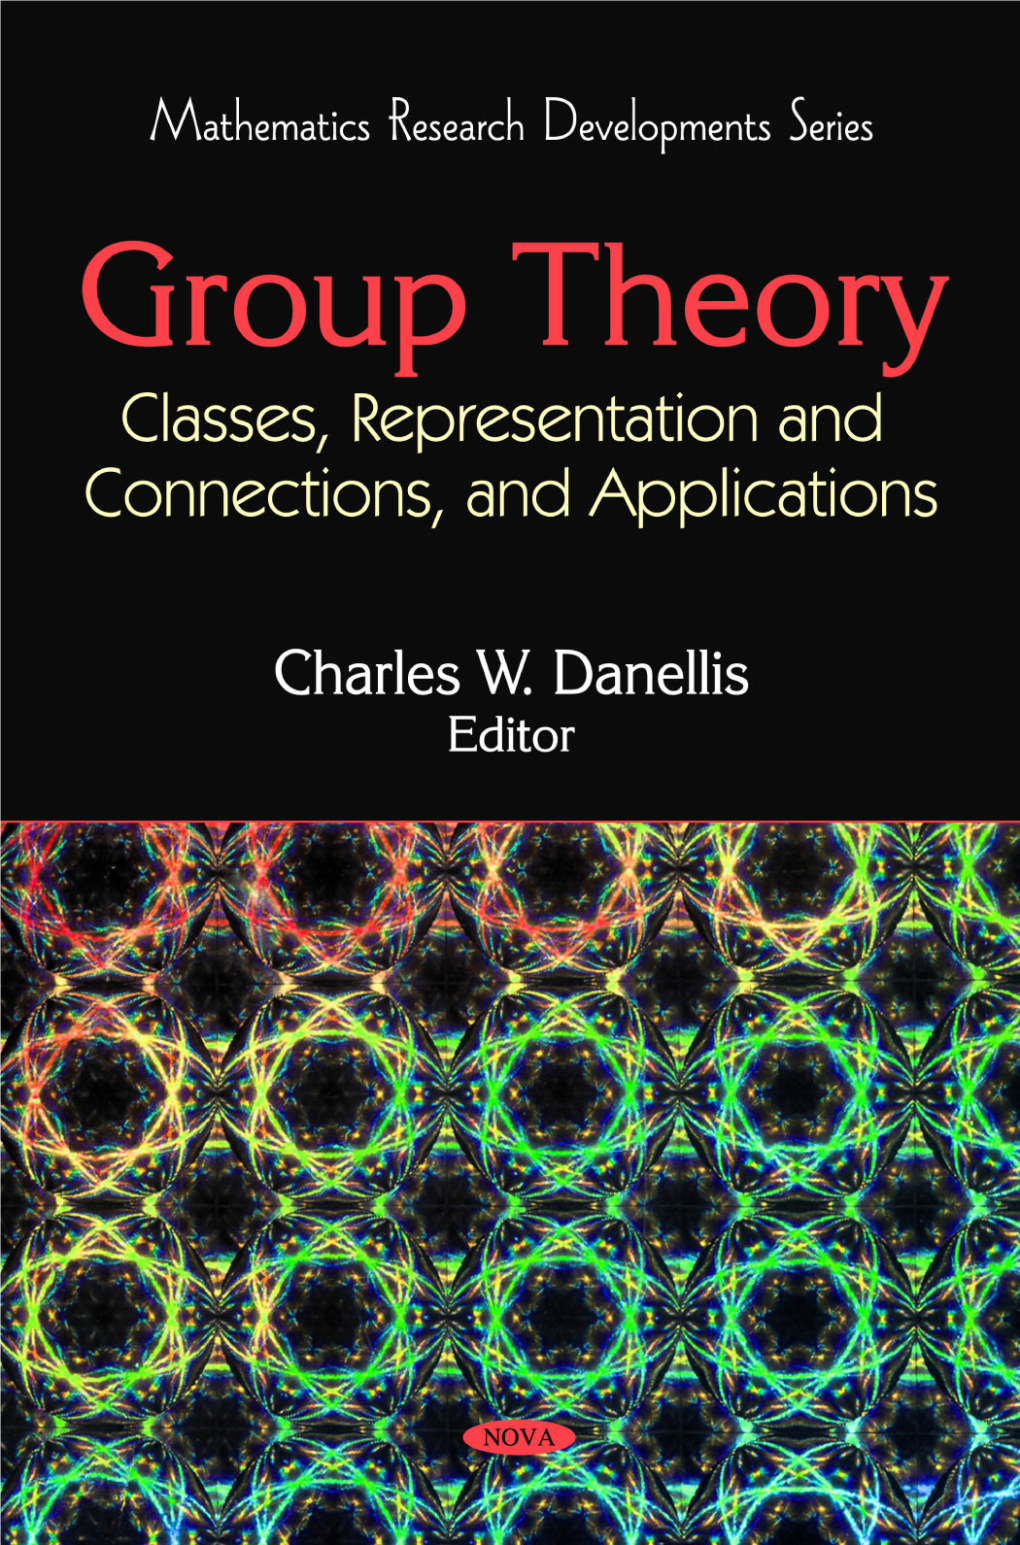 Group Theory: Classes, Representation and Connections, and Applications